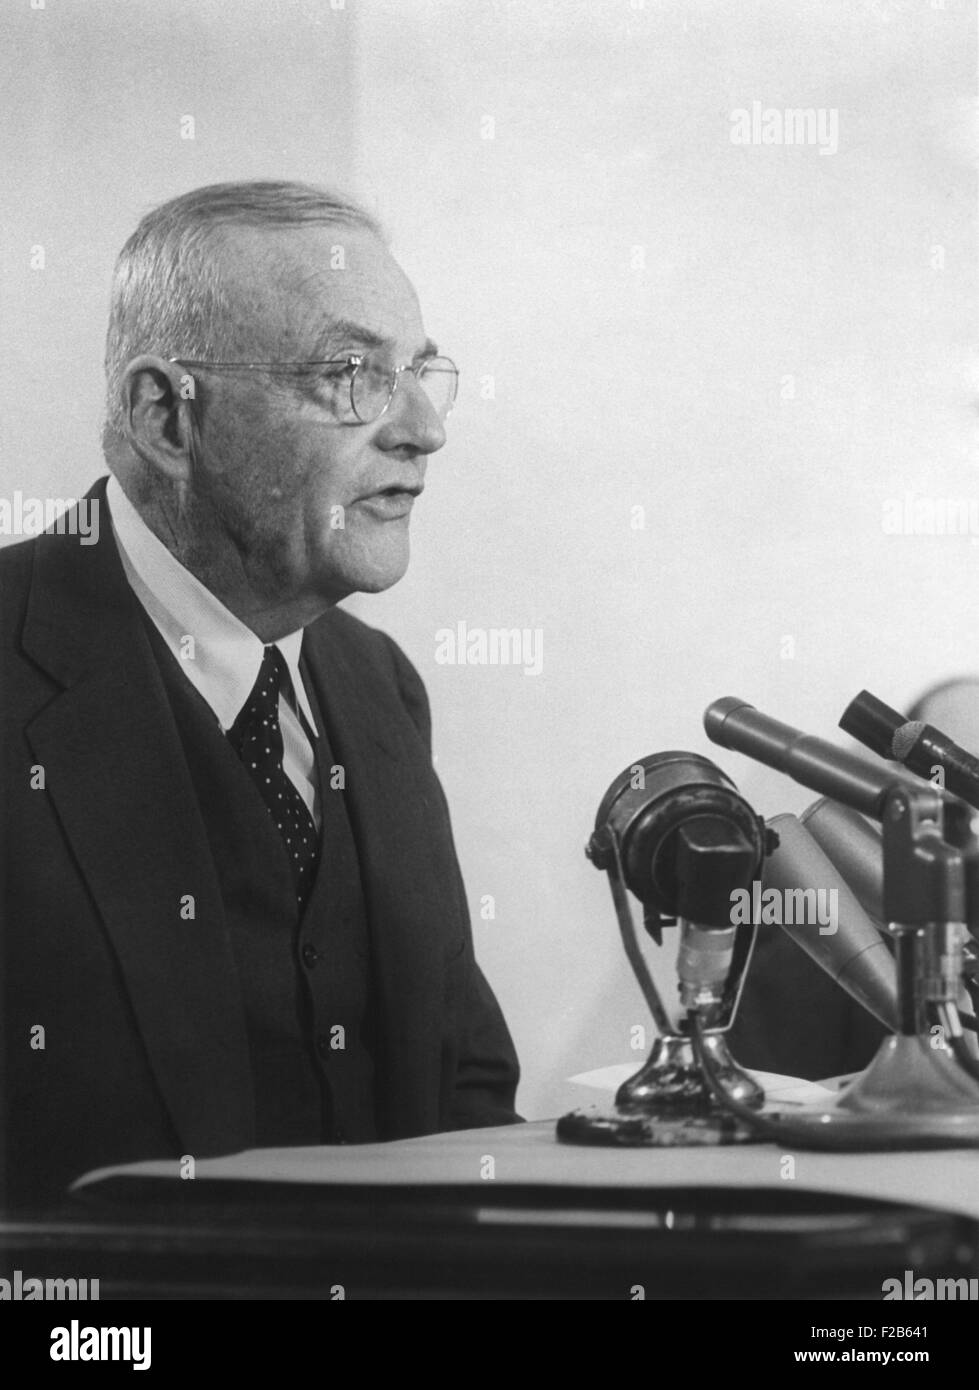 Secretary of State John Foster Dulles speaking into microphones. Feb. 3, 1959. He was about to embark on his final European trip to Britain, France and Germany. In ill health, he resigned from office on April 22, 1959 and died on May 24, 1959. - (BSLOC 2014 16 139) Stock Photo